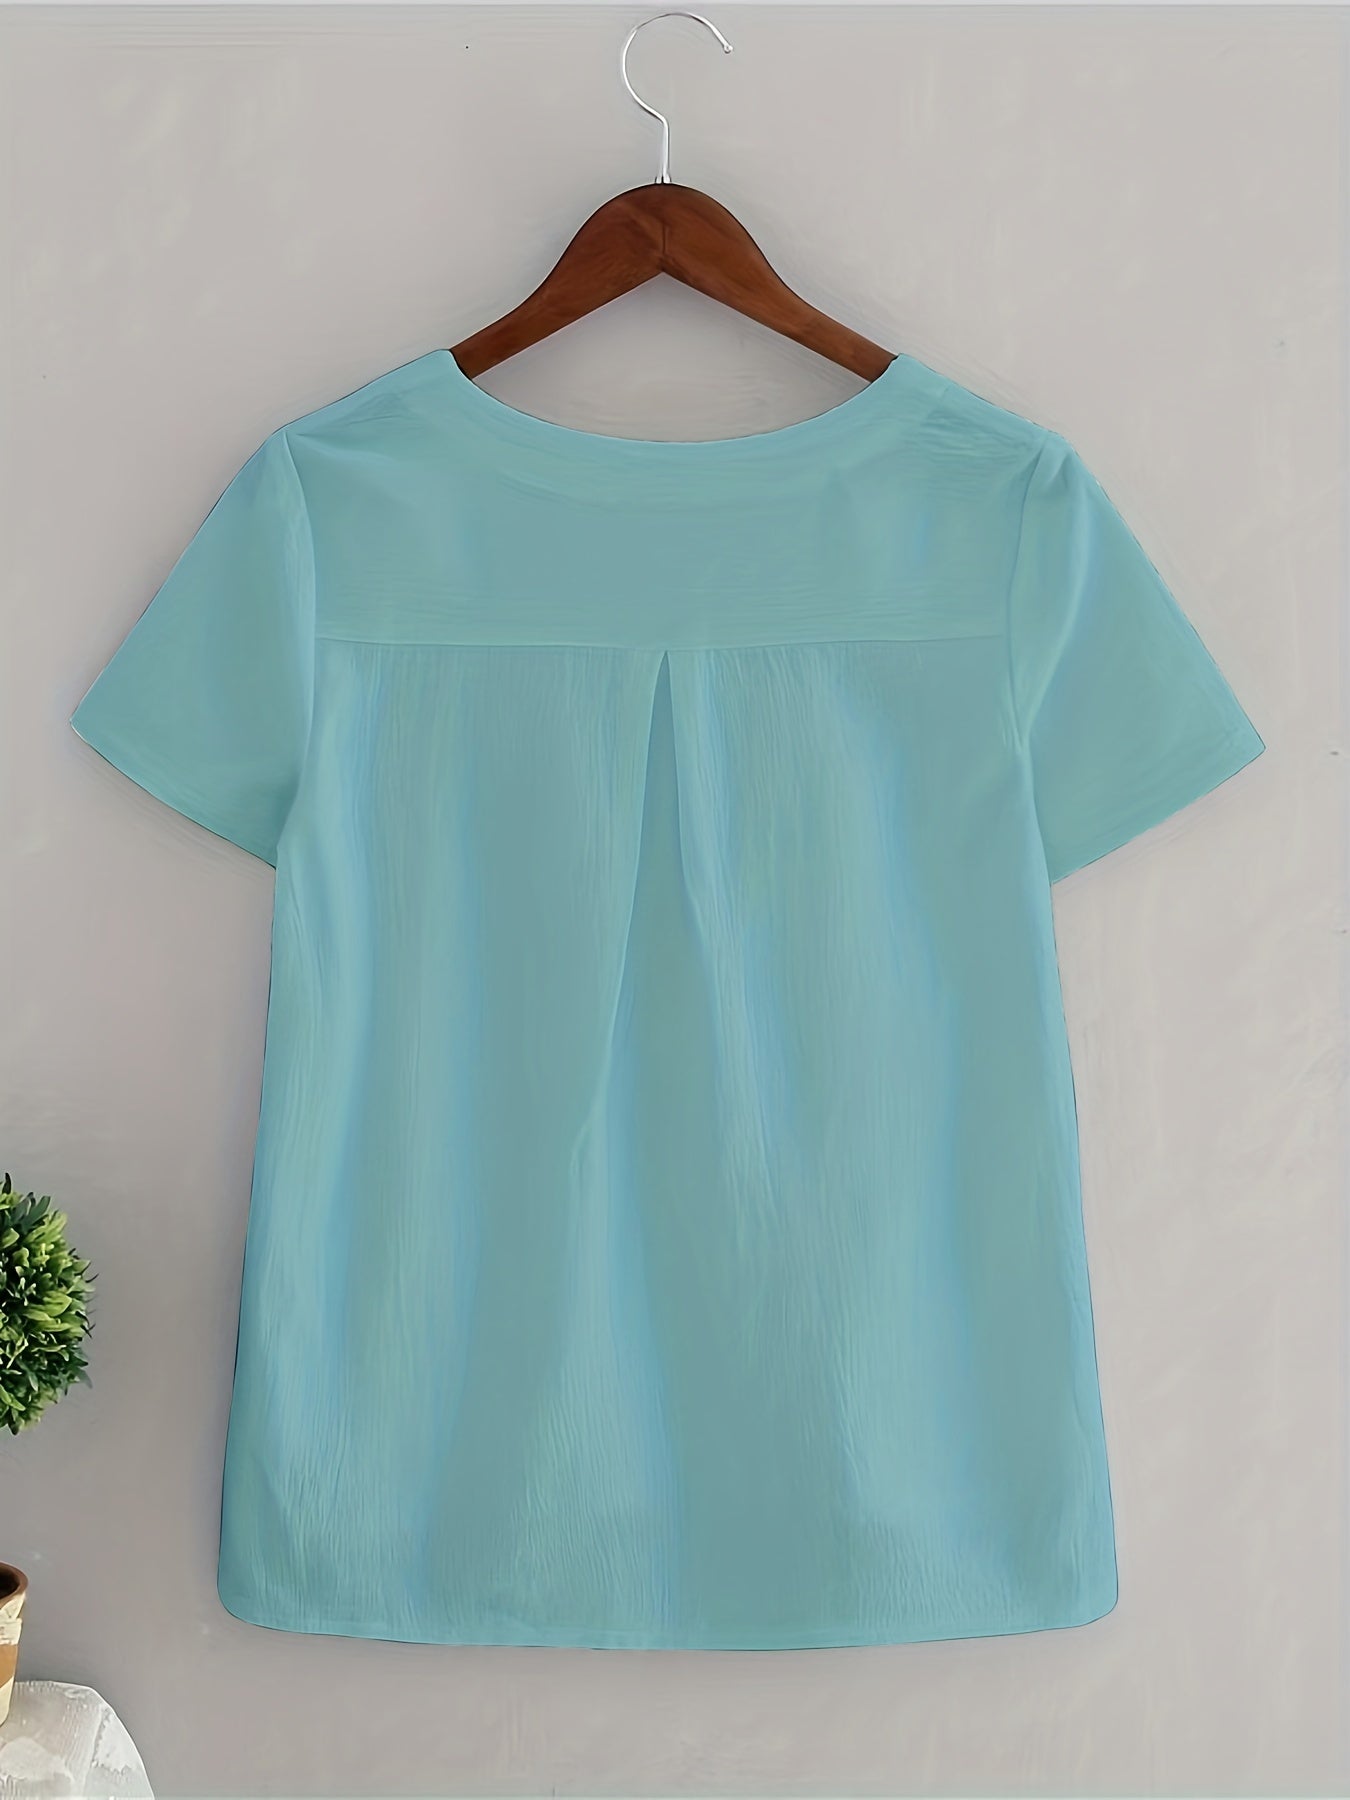 「lovevop」Solid V Neck Blouse, Casual Short Sleeve Summer Comfy Blouse, Women's Clothing